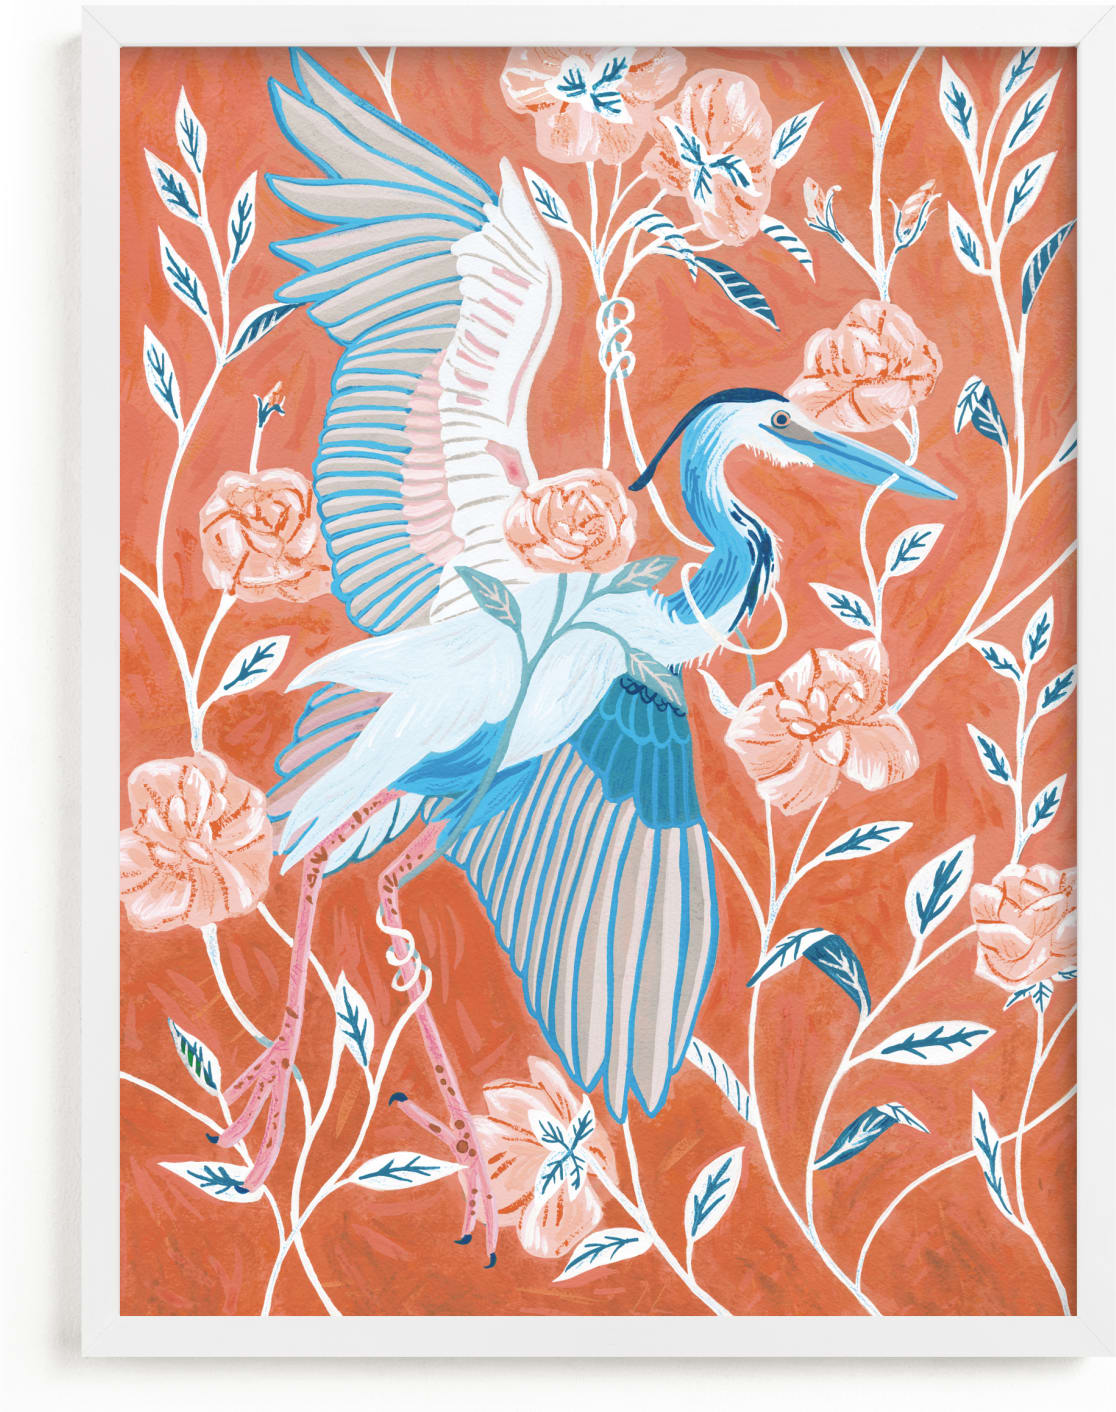 This is a blue art by Stefanie Lane called Blue Heron with Blossoms.